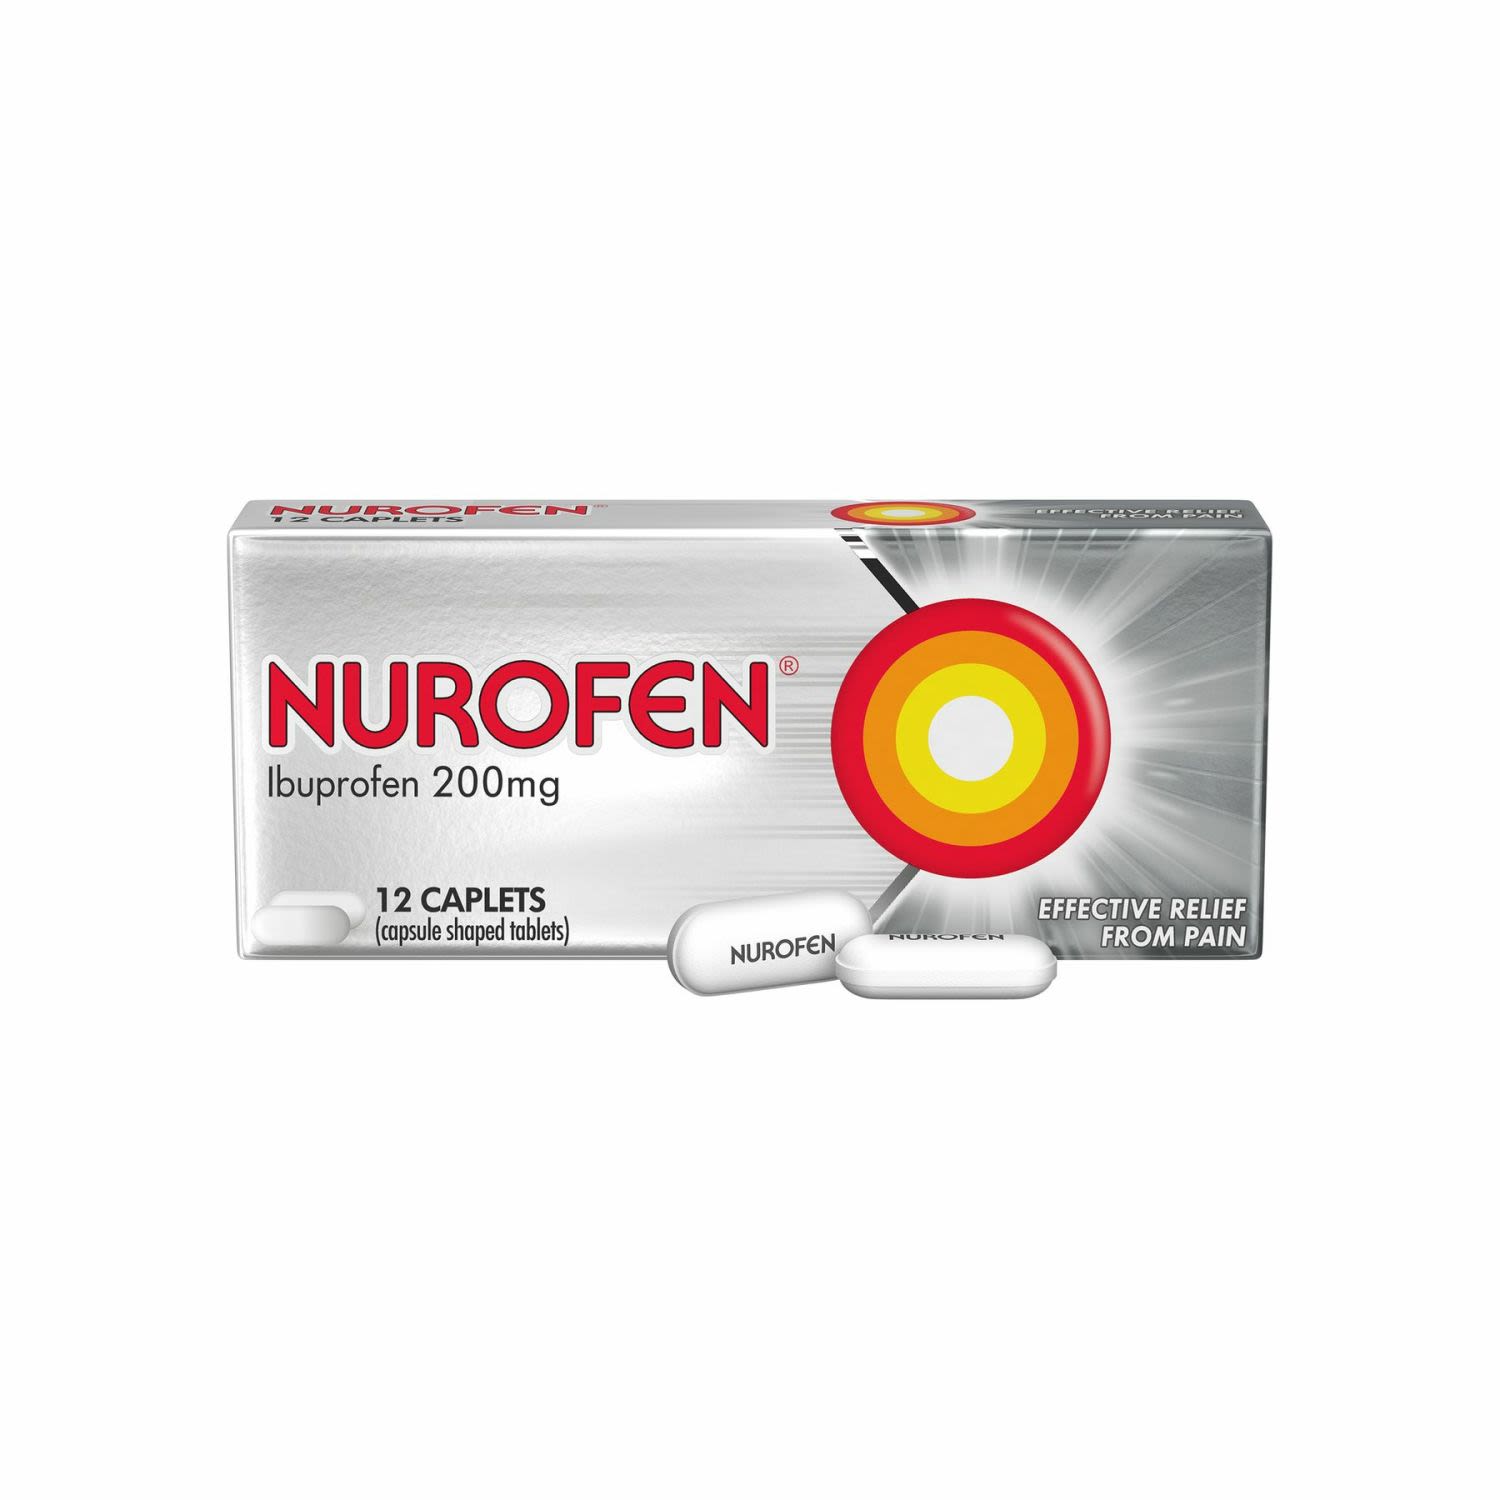 Nurofen Pain and Inflammation Relief Caplets 200mg Ibuprofen, 12 Each